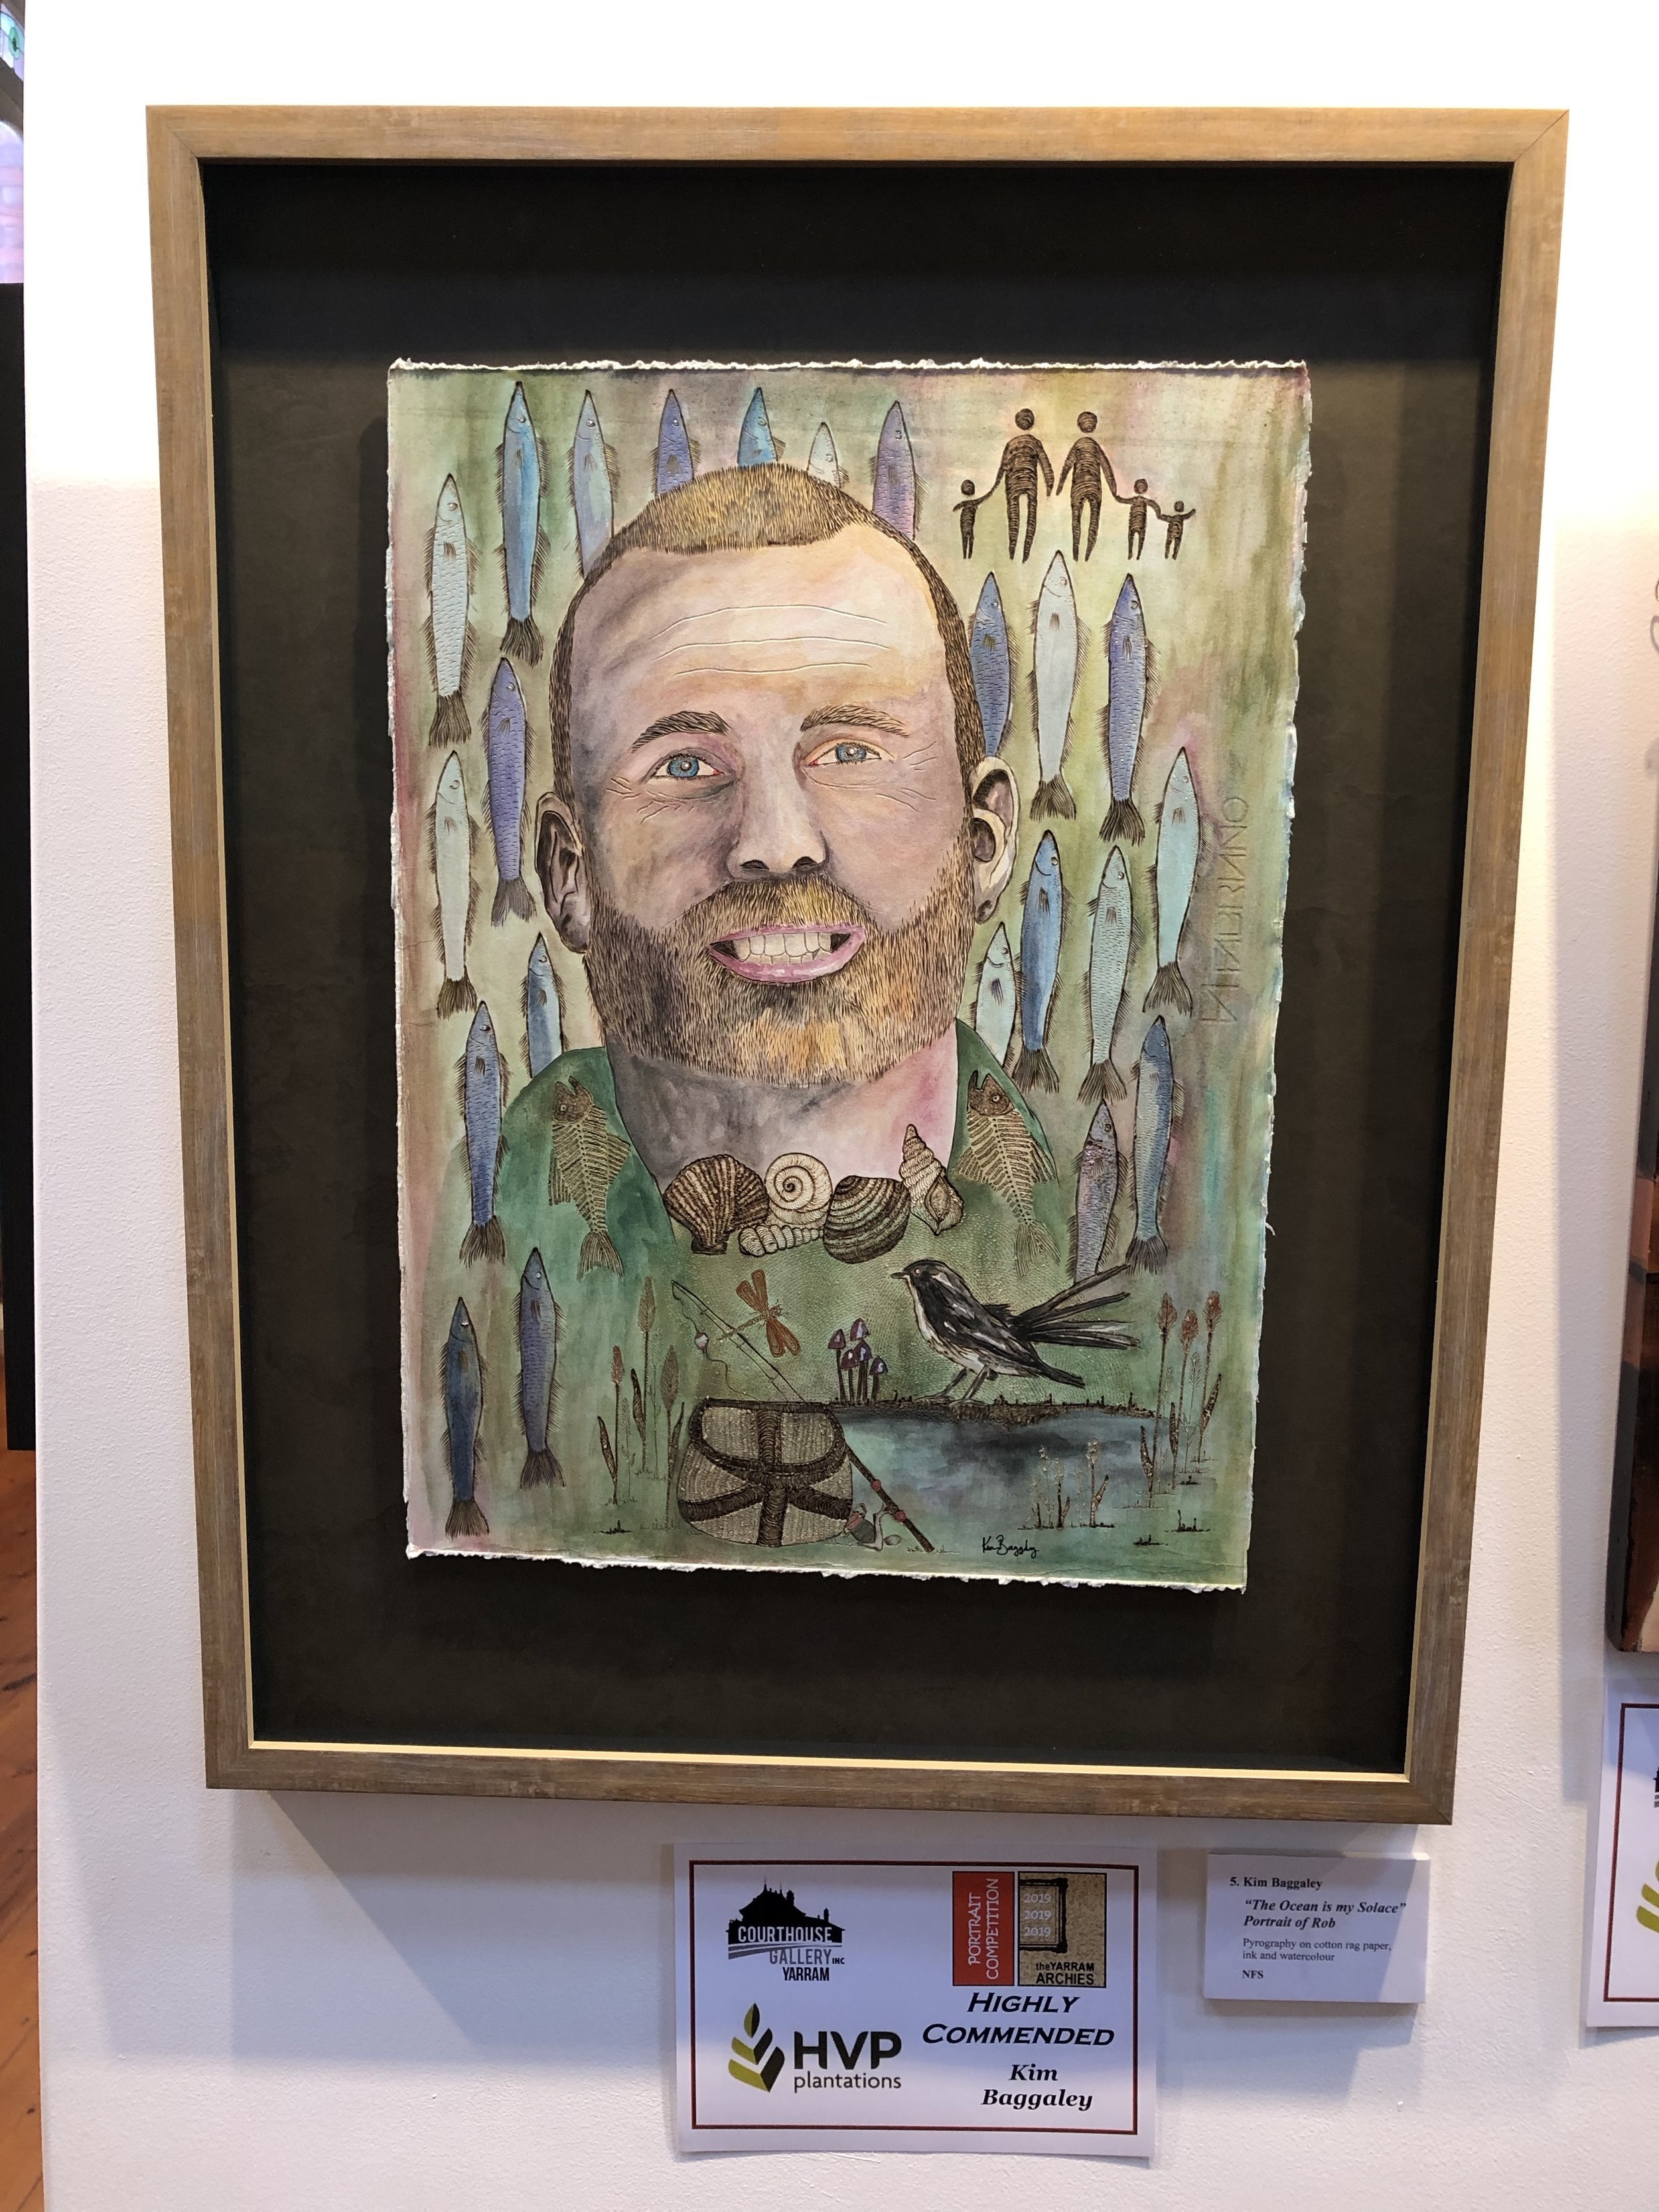  Highly Commended (Open)  Title: “The ocean is my solace - a portrait of Rob”  Pyrography Cotton Rag Paper, Ink and Watercolour 